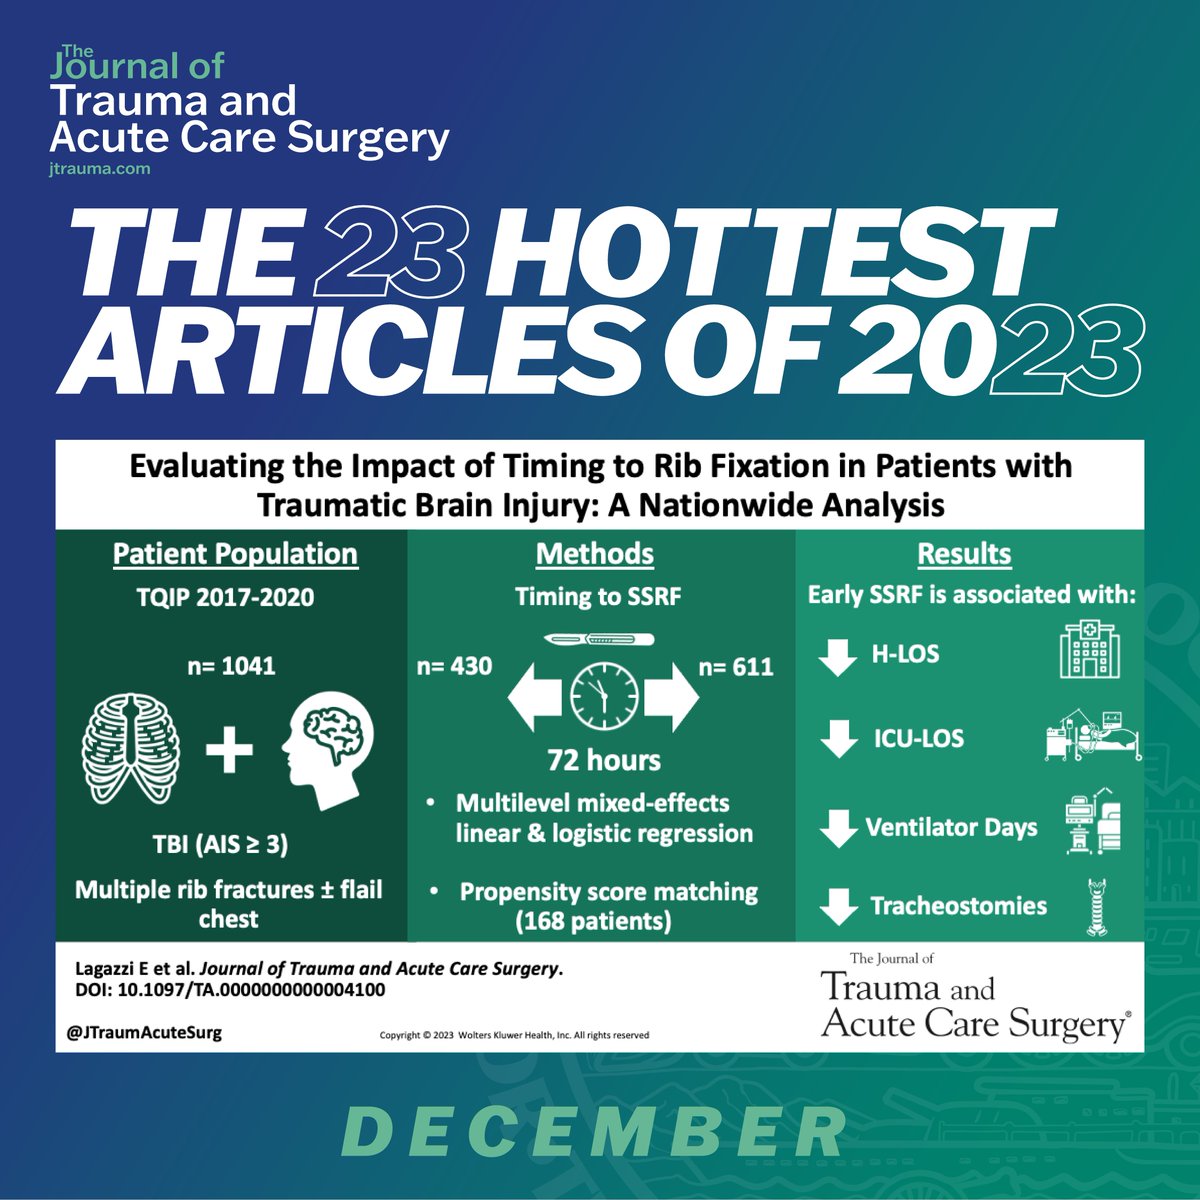 🔥JTACS's Hottest 23 Articles of 2023🔥 2️⃣

'Evaluating the impact of timing to rib fixation in patients with traumatic brain injury: A nationwide analysis' 

@MGHSurgery @TraumaMGH @EmanueleLagazzi @eljefe_md @argandykov #SoMe4Trauma #SoMe4Surgery

journals.lww.com/jtrauma/pages/…